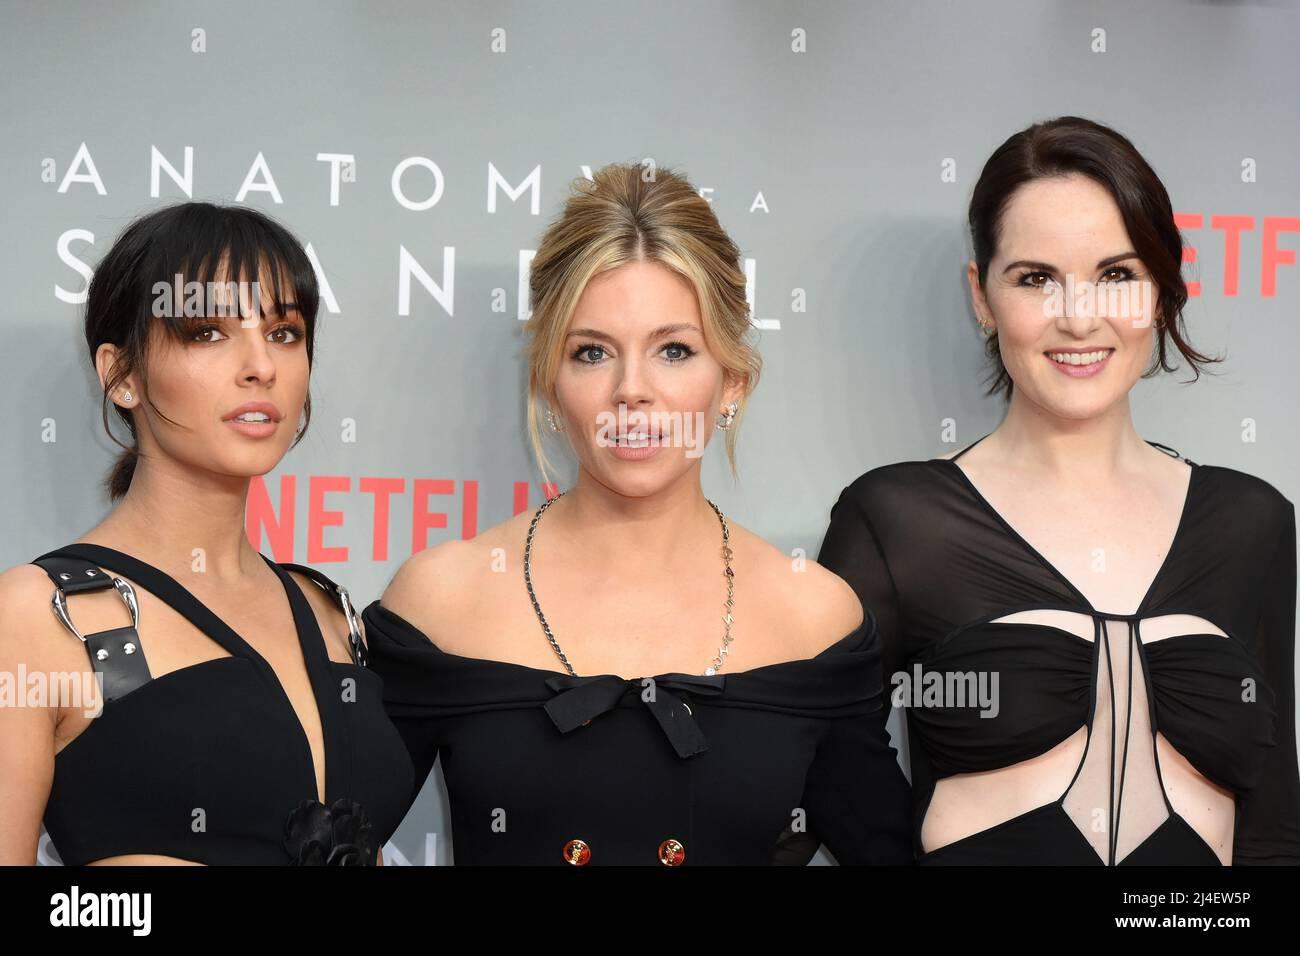 London, UK. 14 April 2022. Naomi Scott, Sienna Miller, Michelle Dockery at the World premiere of Anatomy of a Scandal at Curzon Mayfair in London. Picture date: Thursday April 14, 2022. Photo credit should read: Matt Crossick/Empics/Alamy Live News Stock Photo